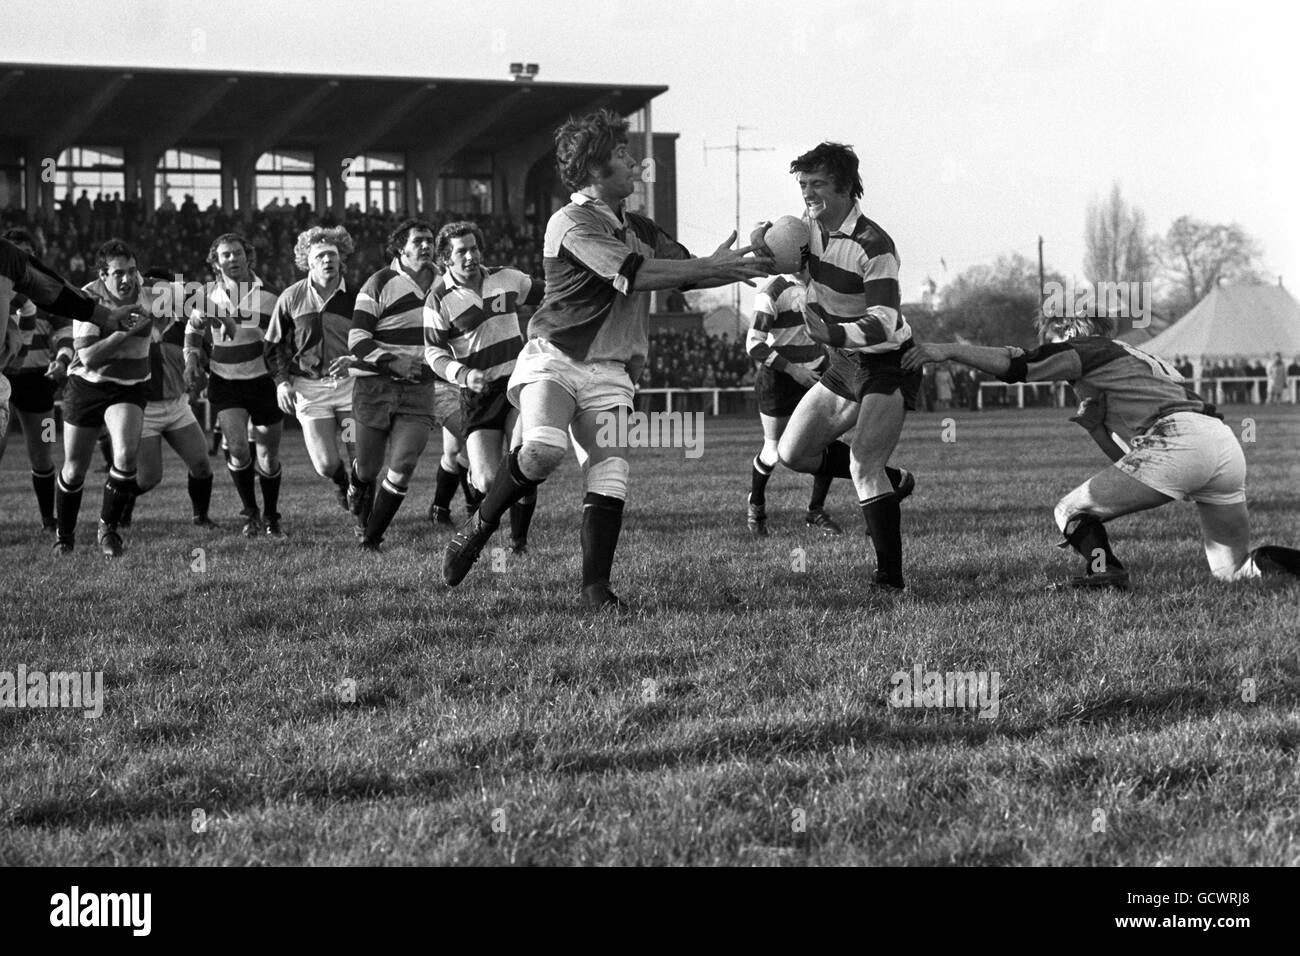 Rugby-Union - John Player Knock-out-Cup - Harlequins V Gloucester - Twickenham Stoop Stockfoto